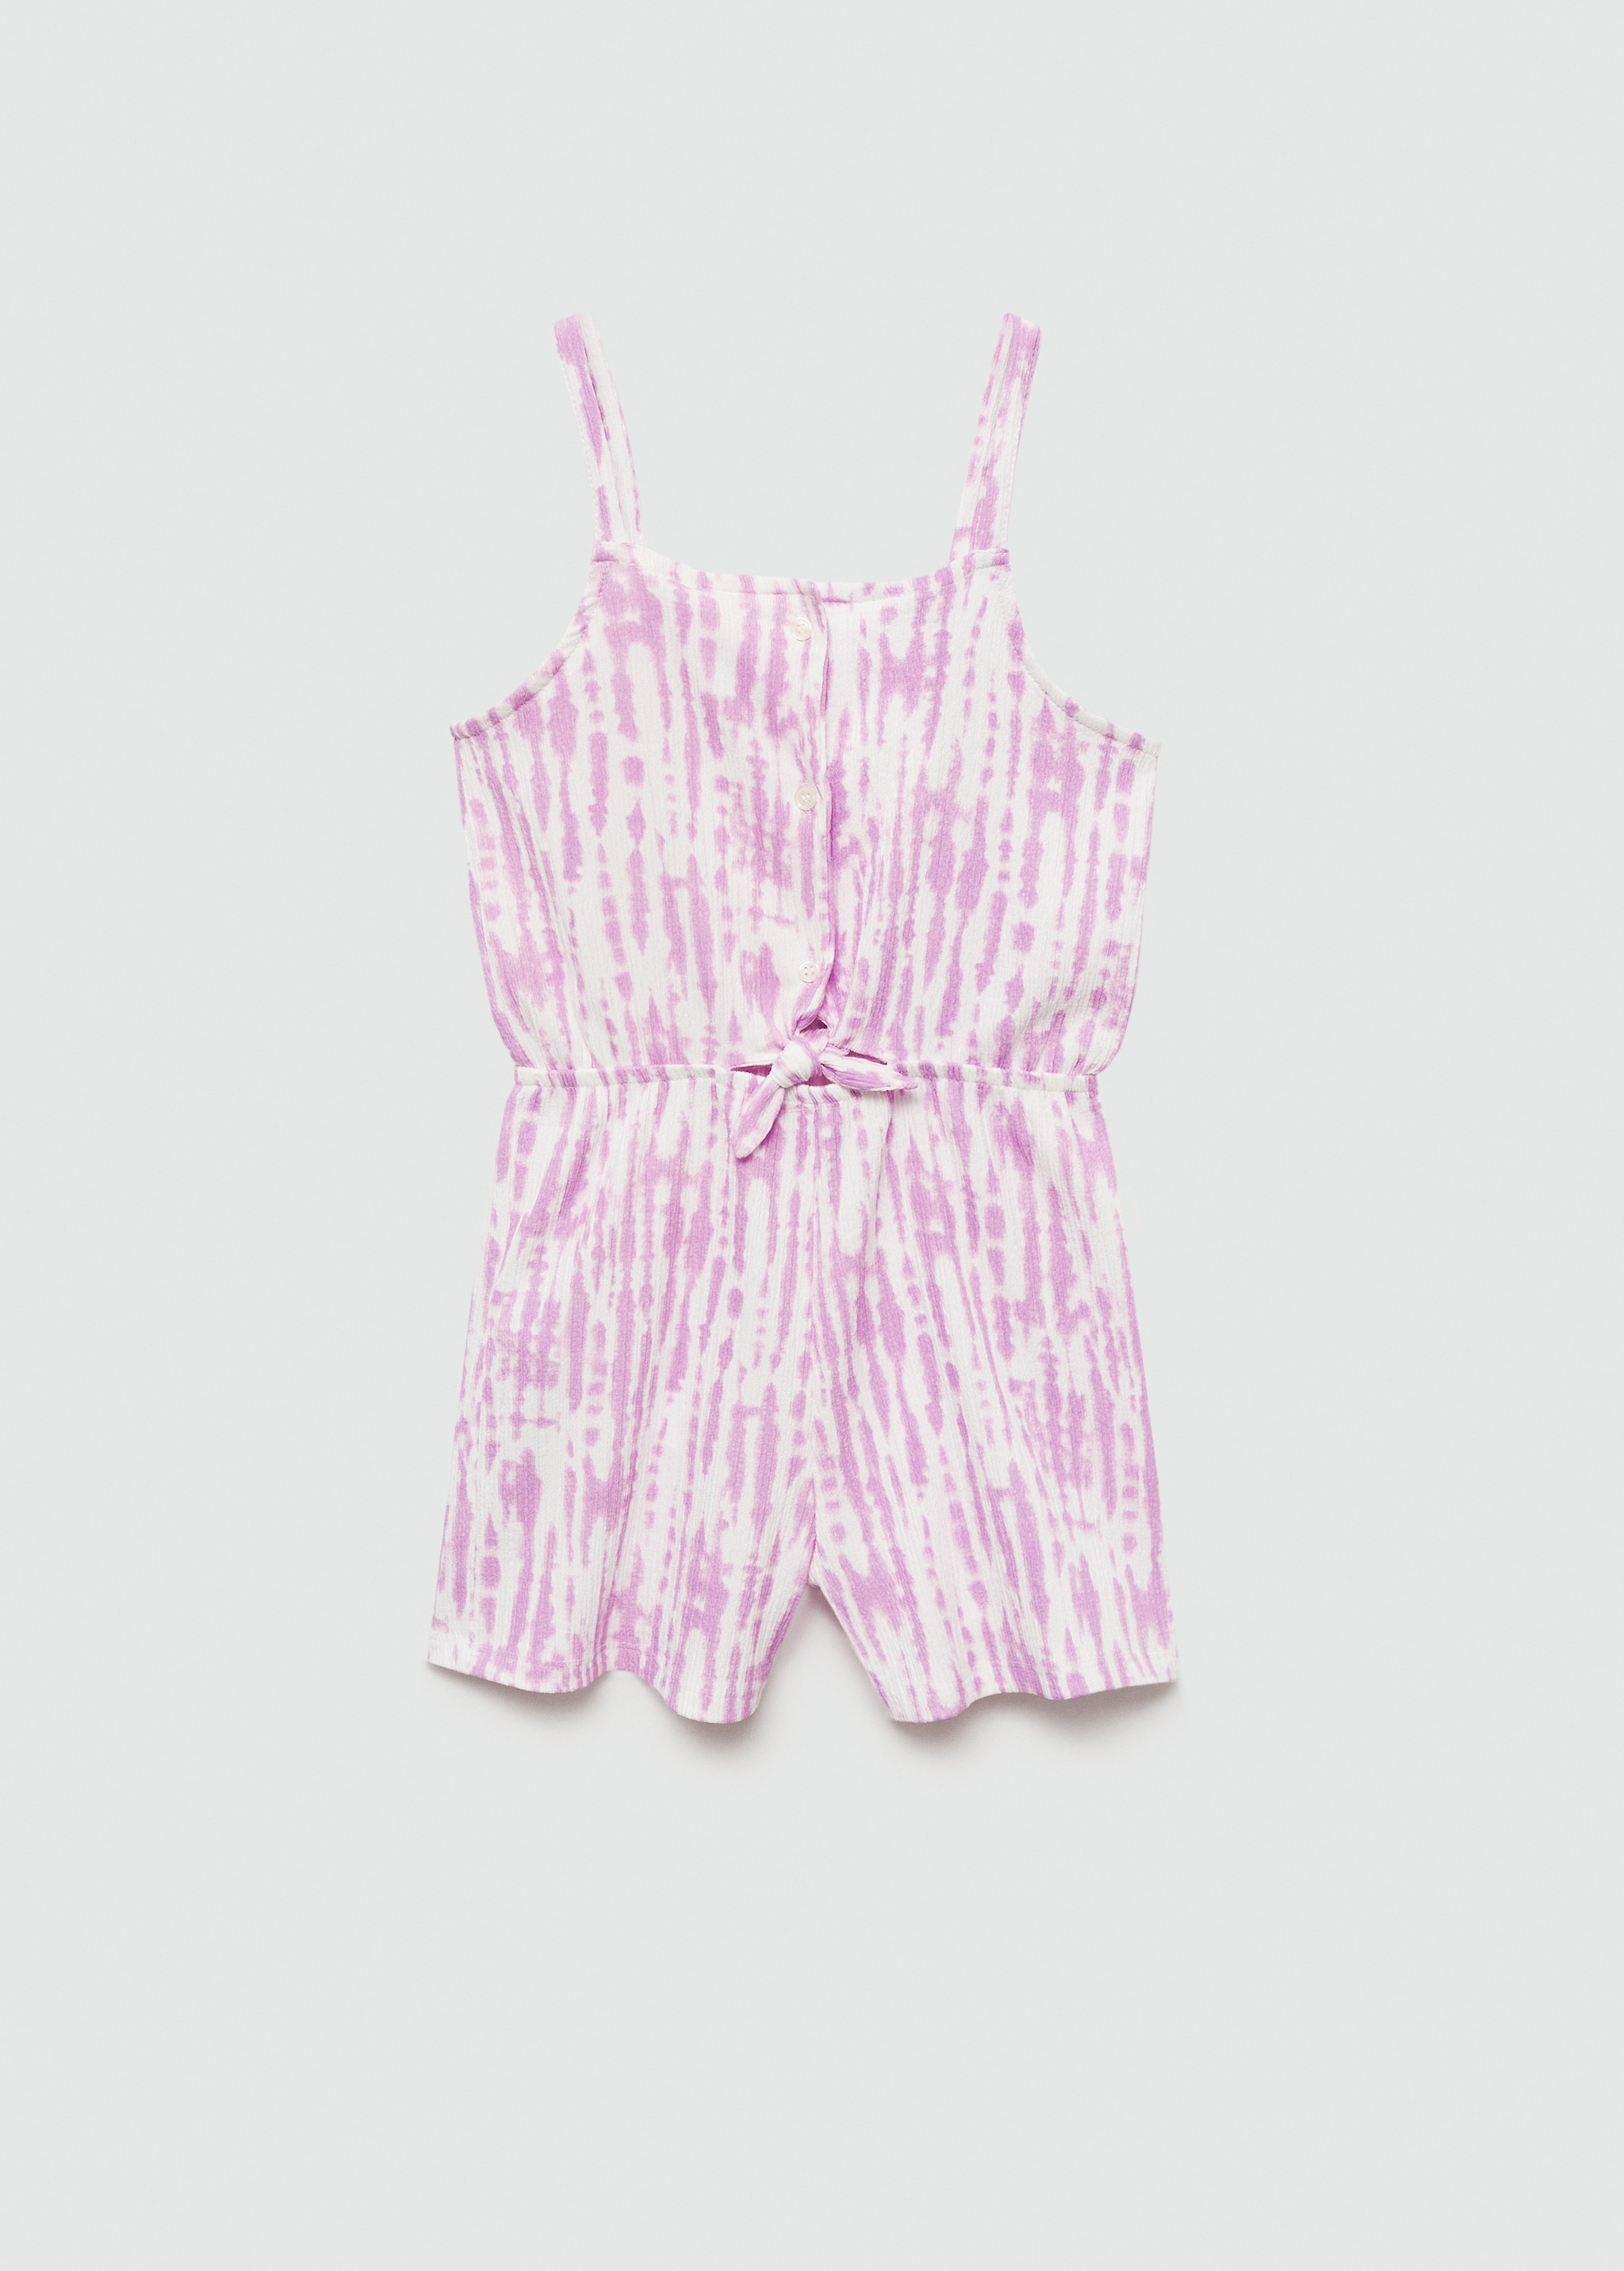 Playsuit tiedye - Article without model